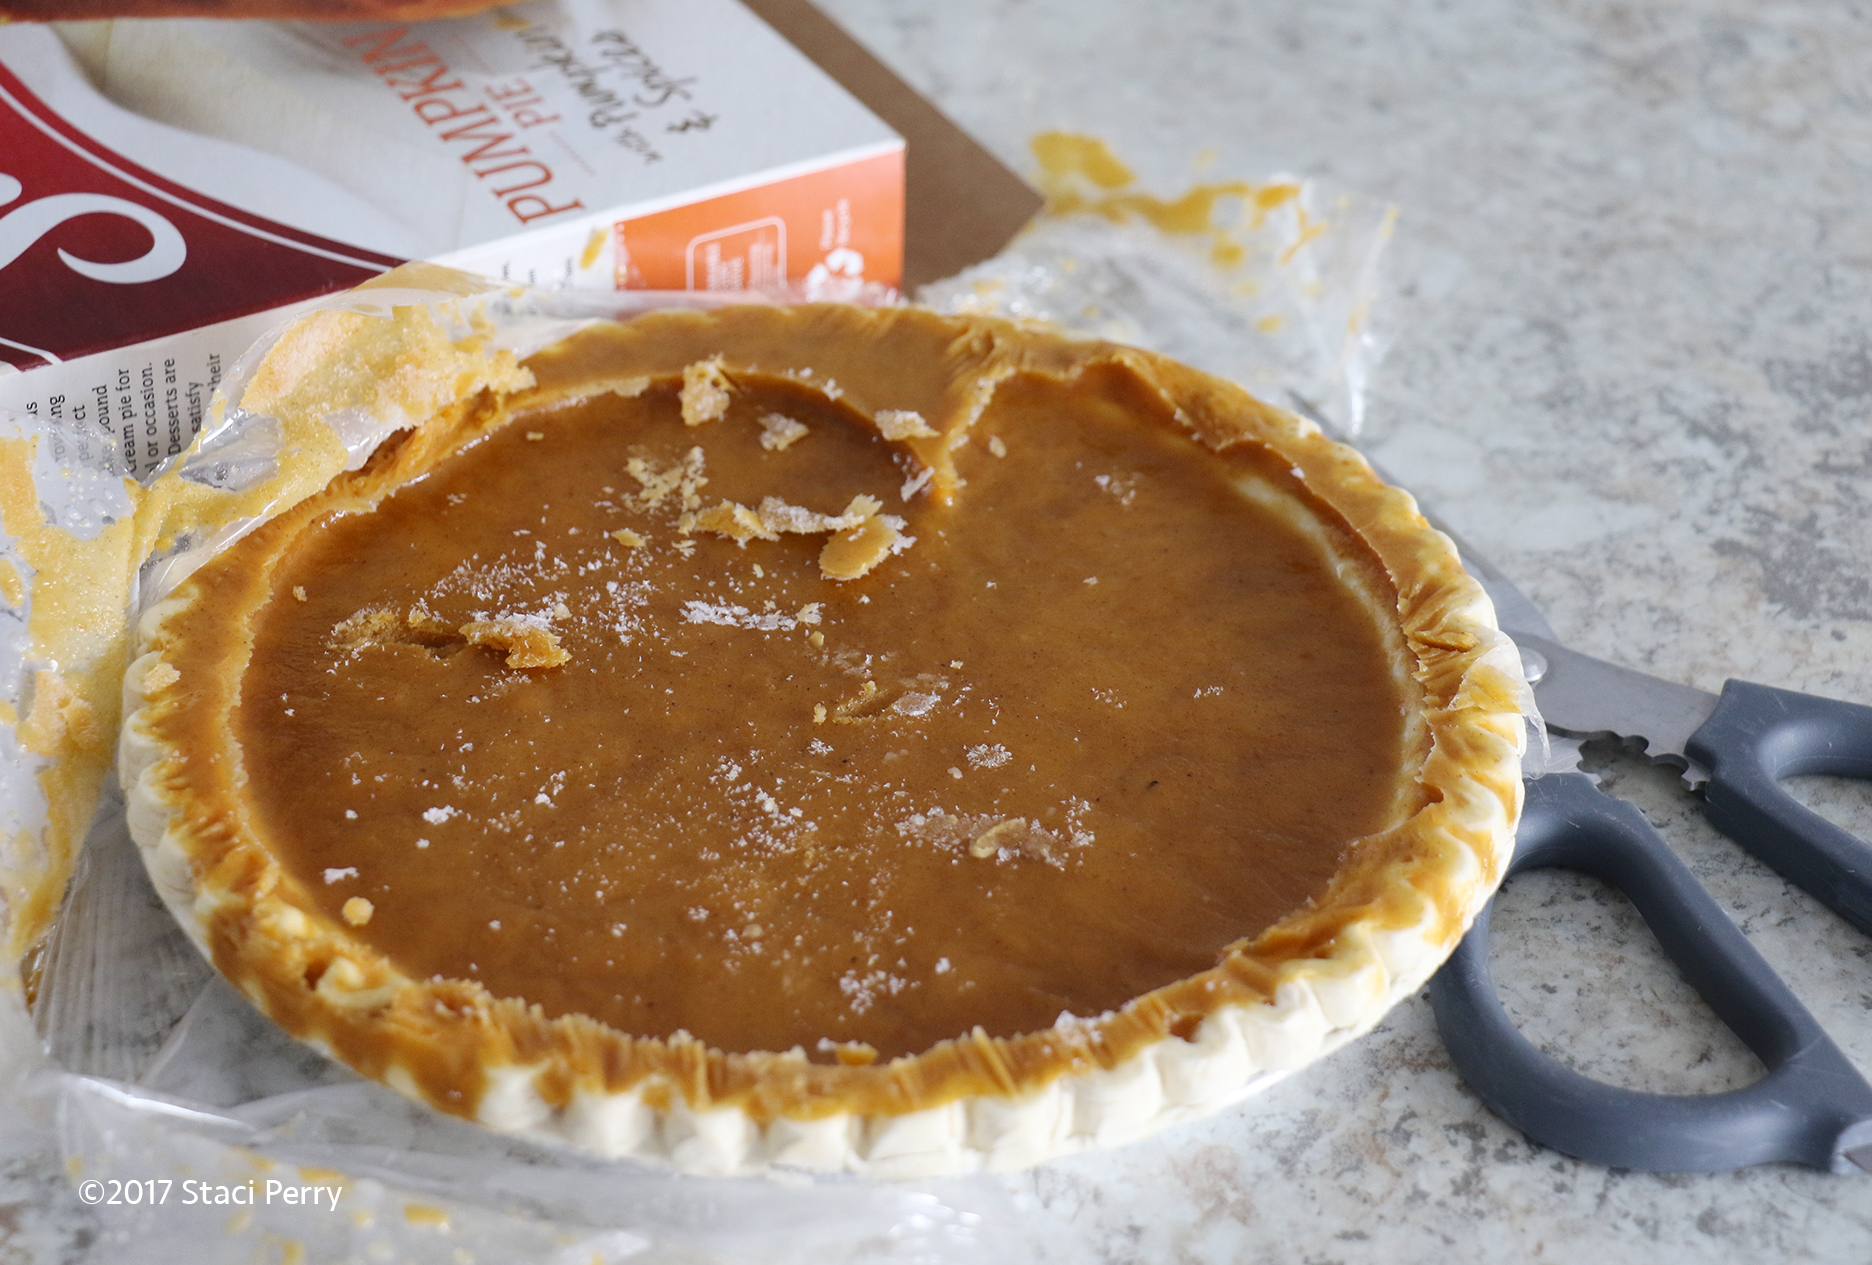 How Was I to Know the Frozen Pumpkin Pie Needed to be Baked?